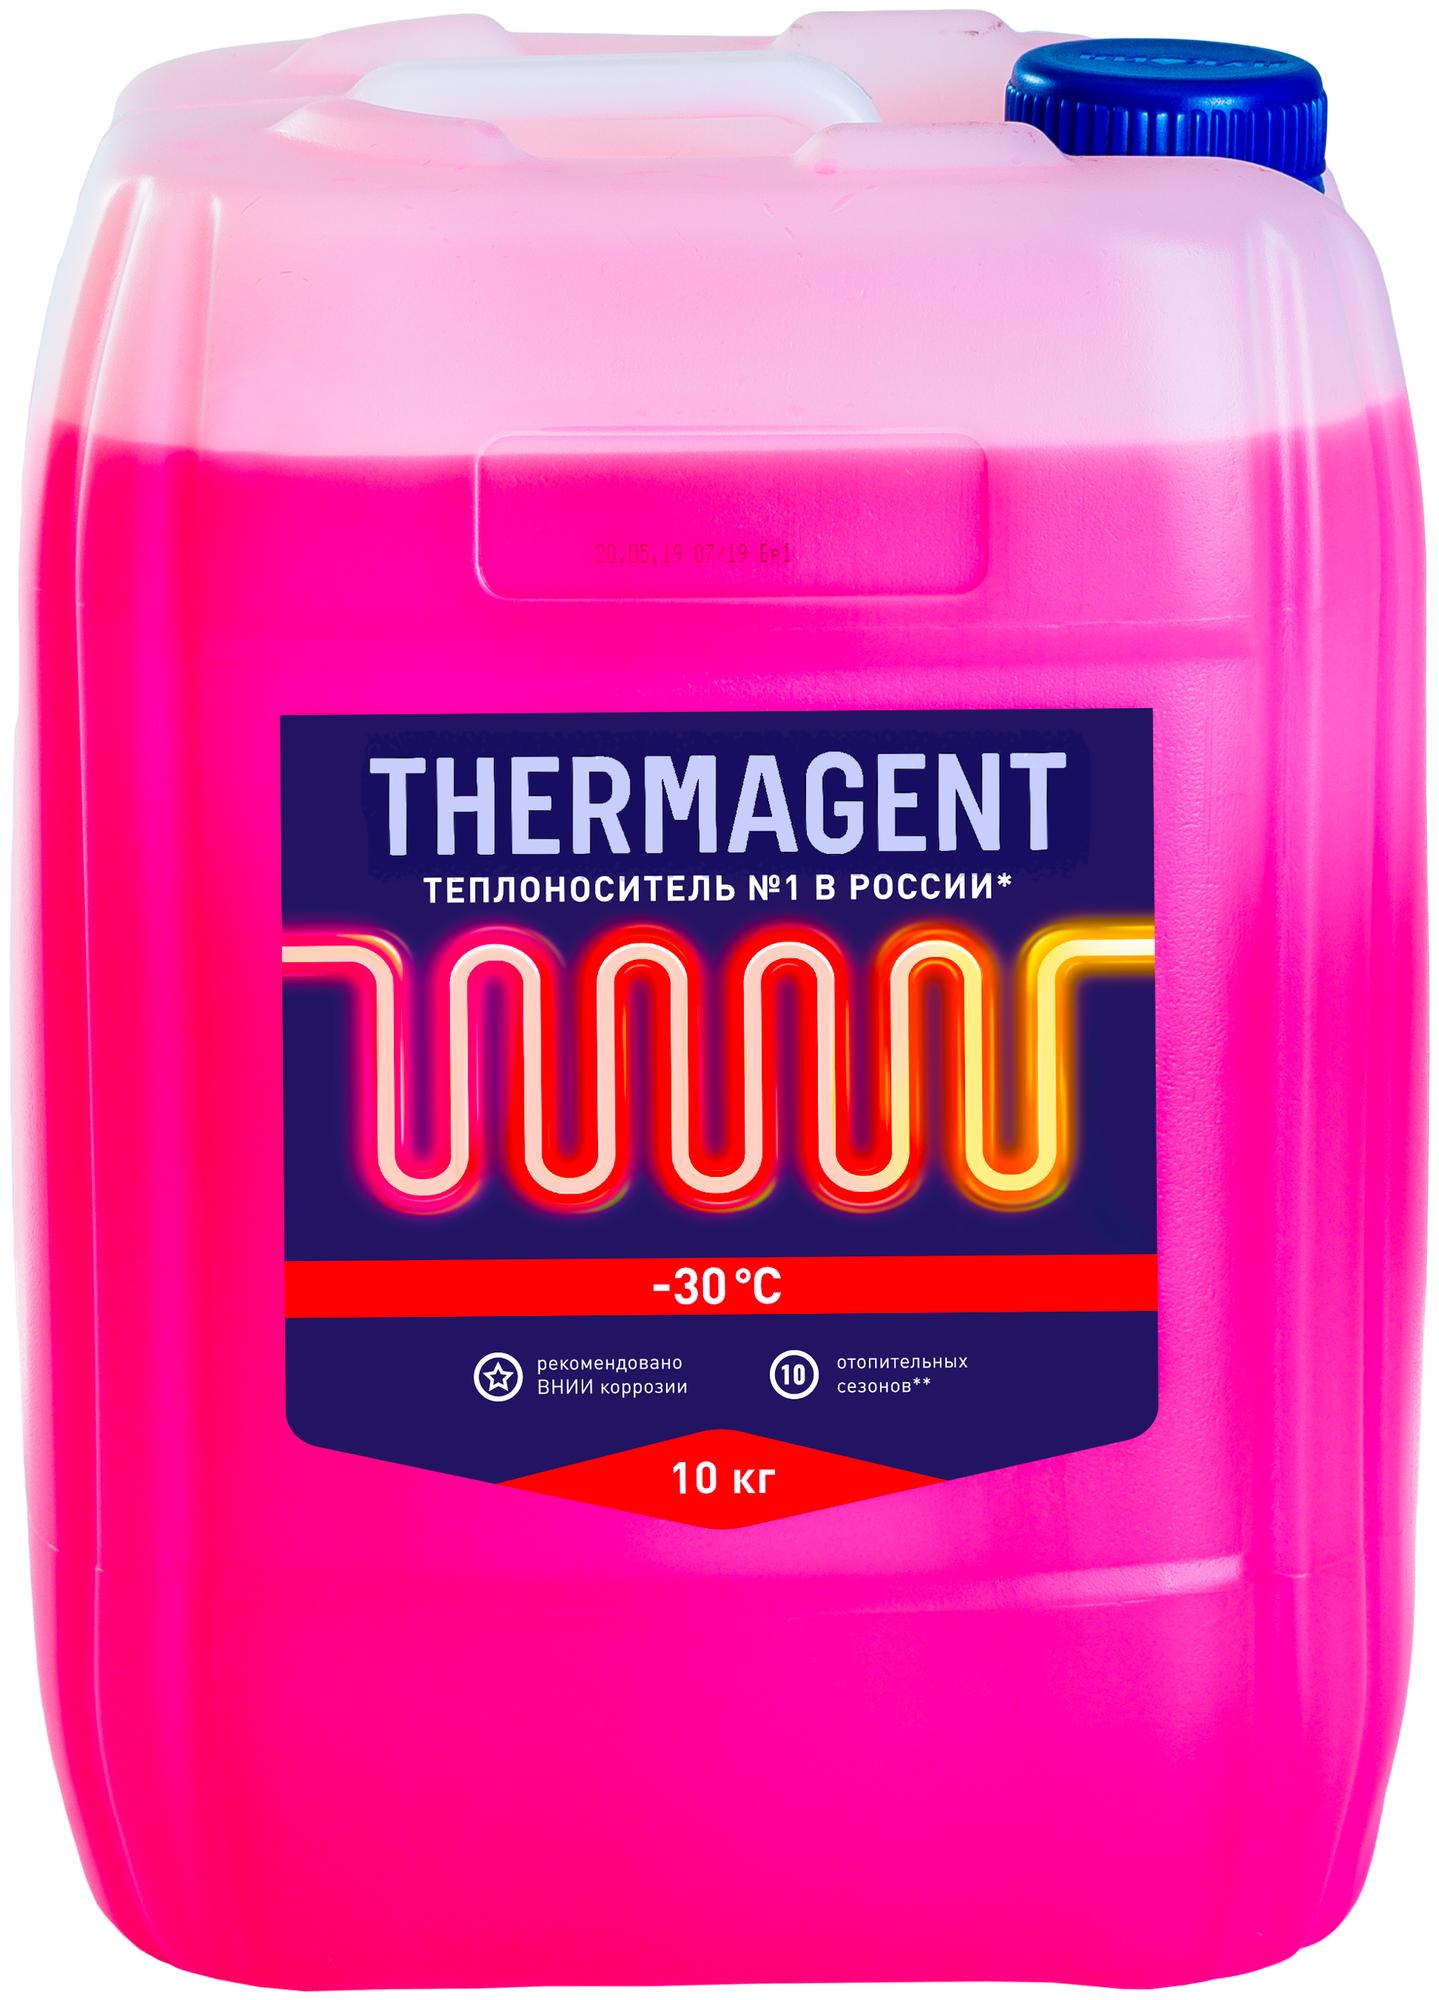  THERMAGENT  -30 10 